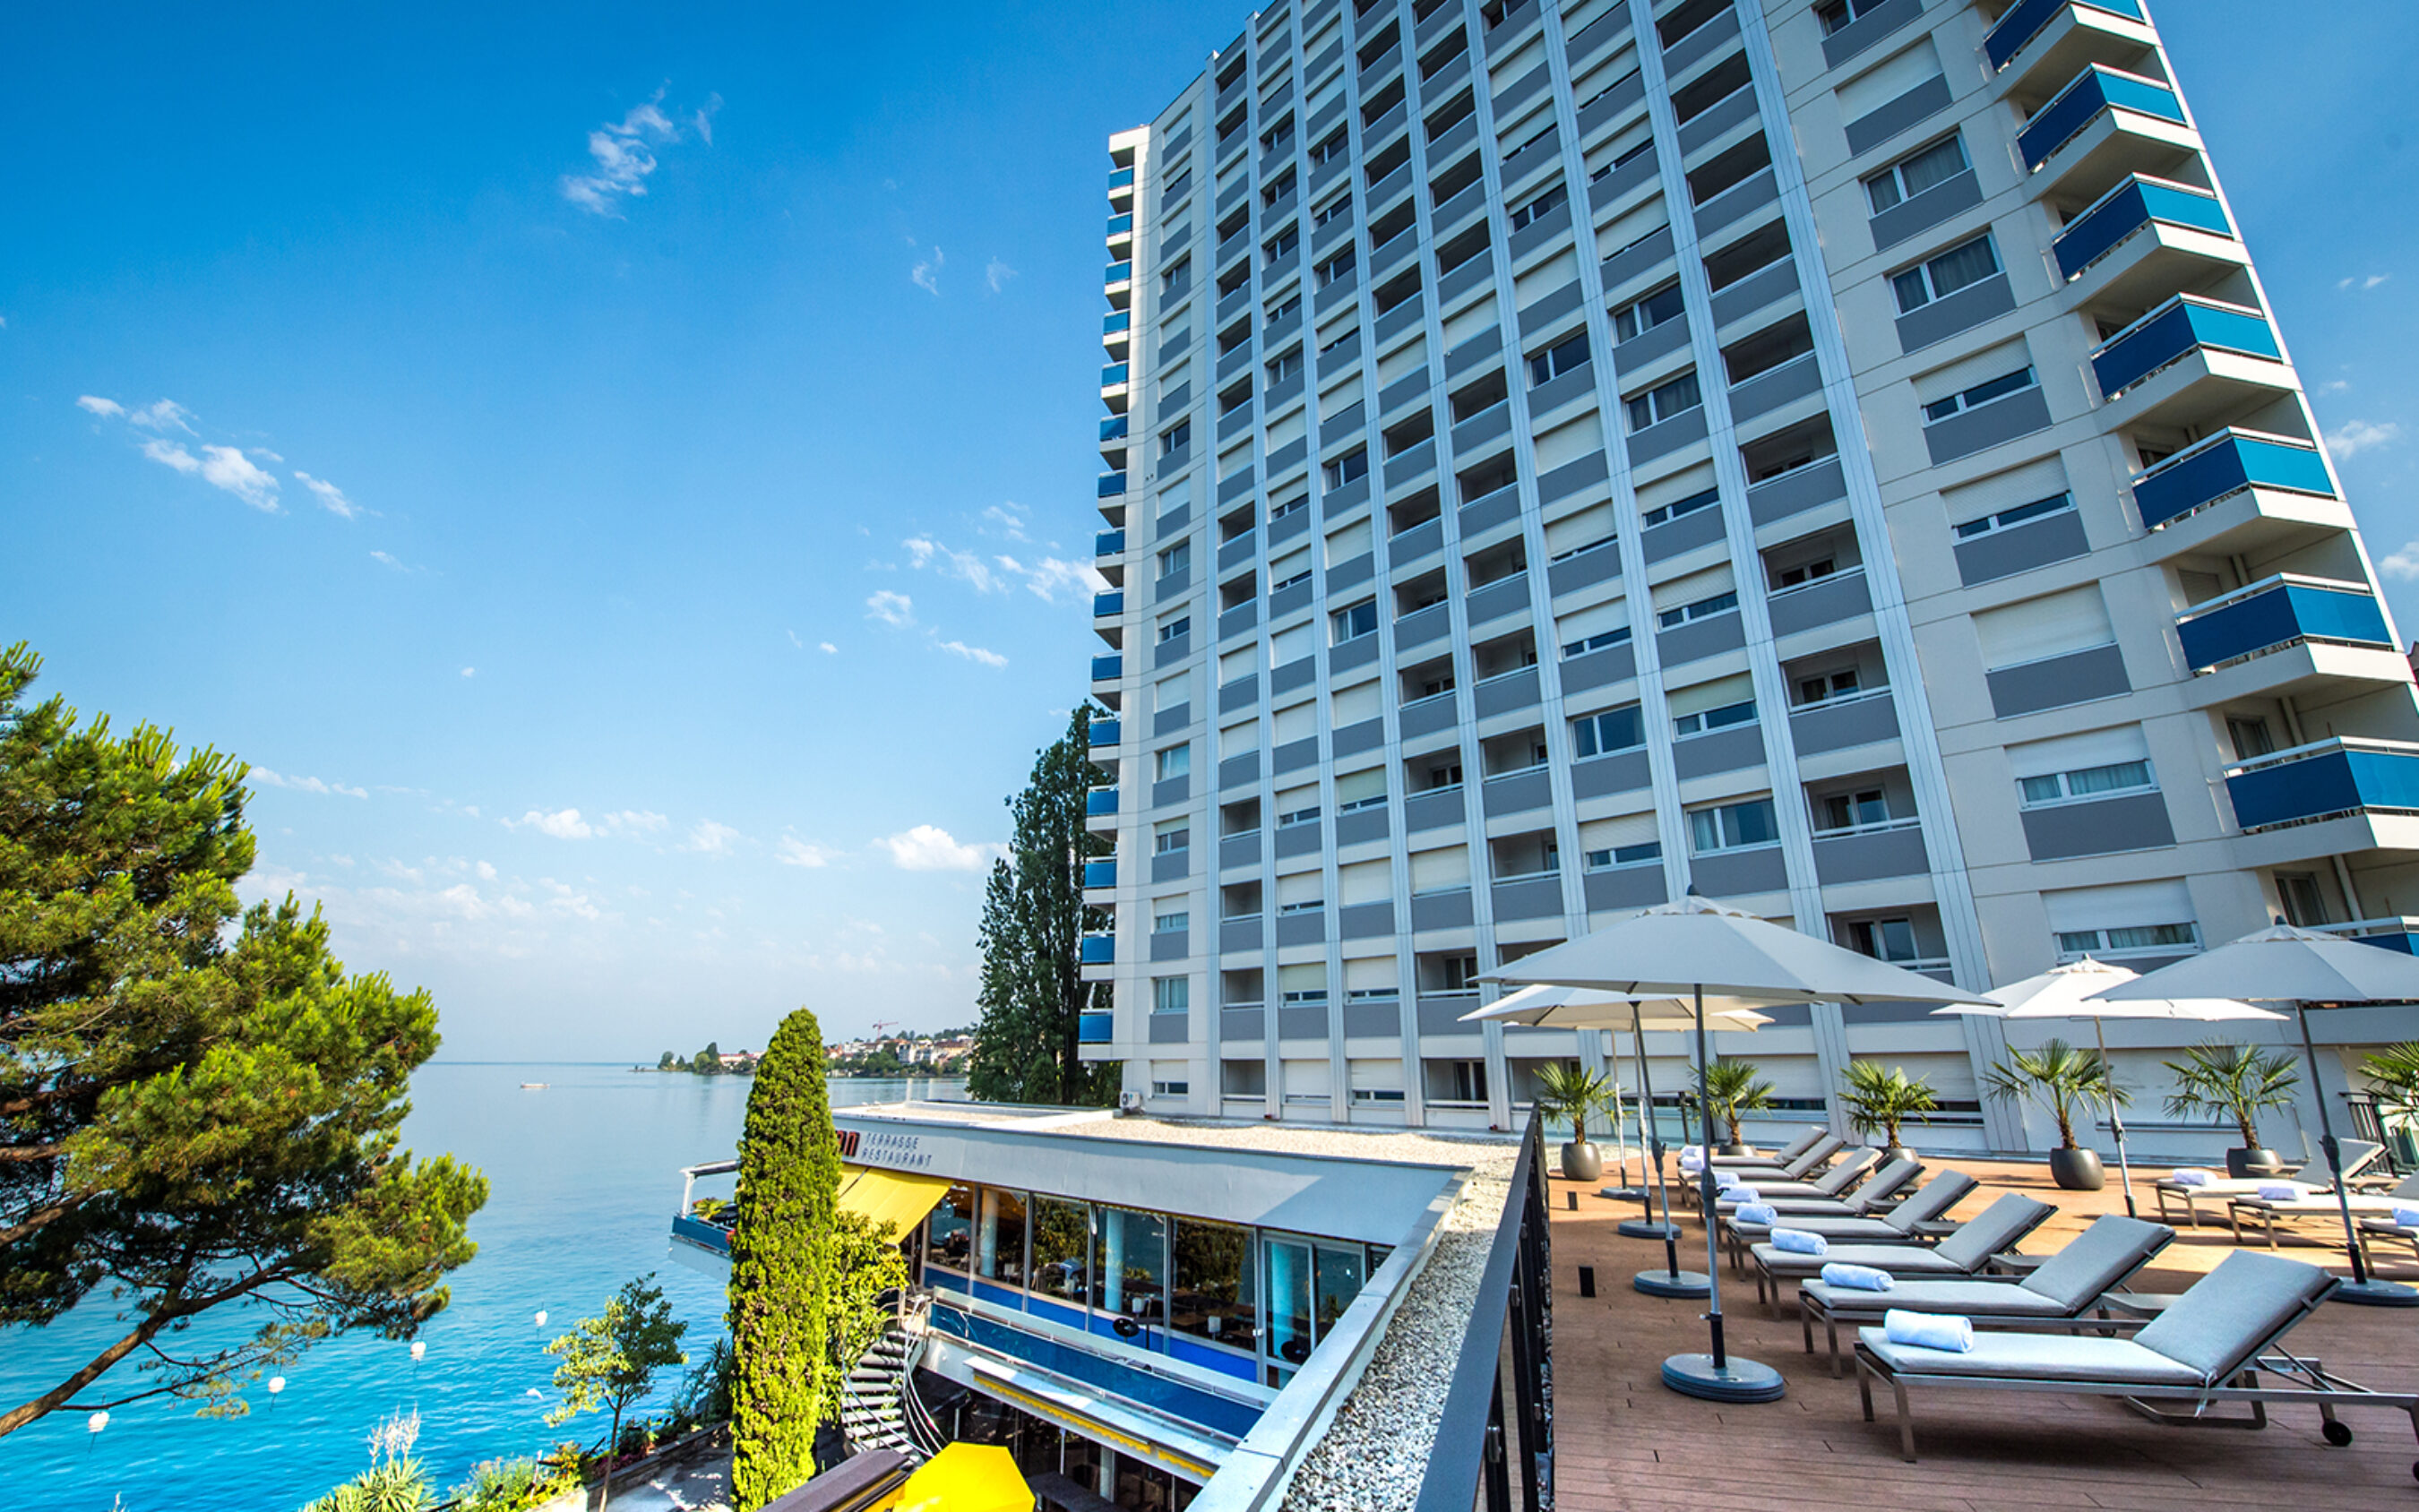 Montreux eurotel hotelbooker 01